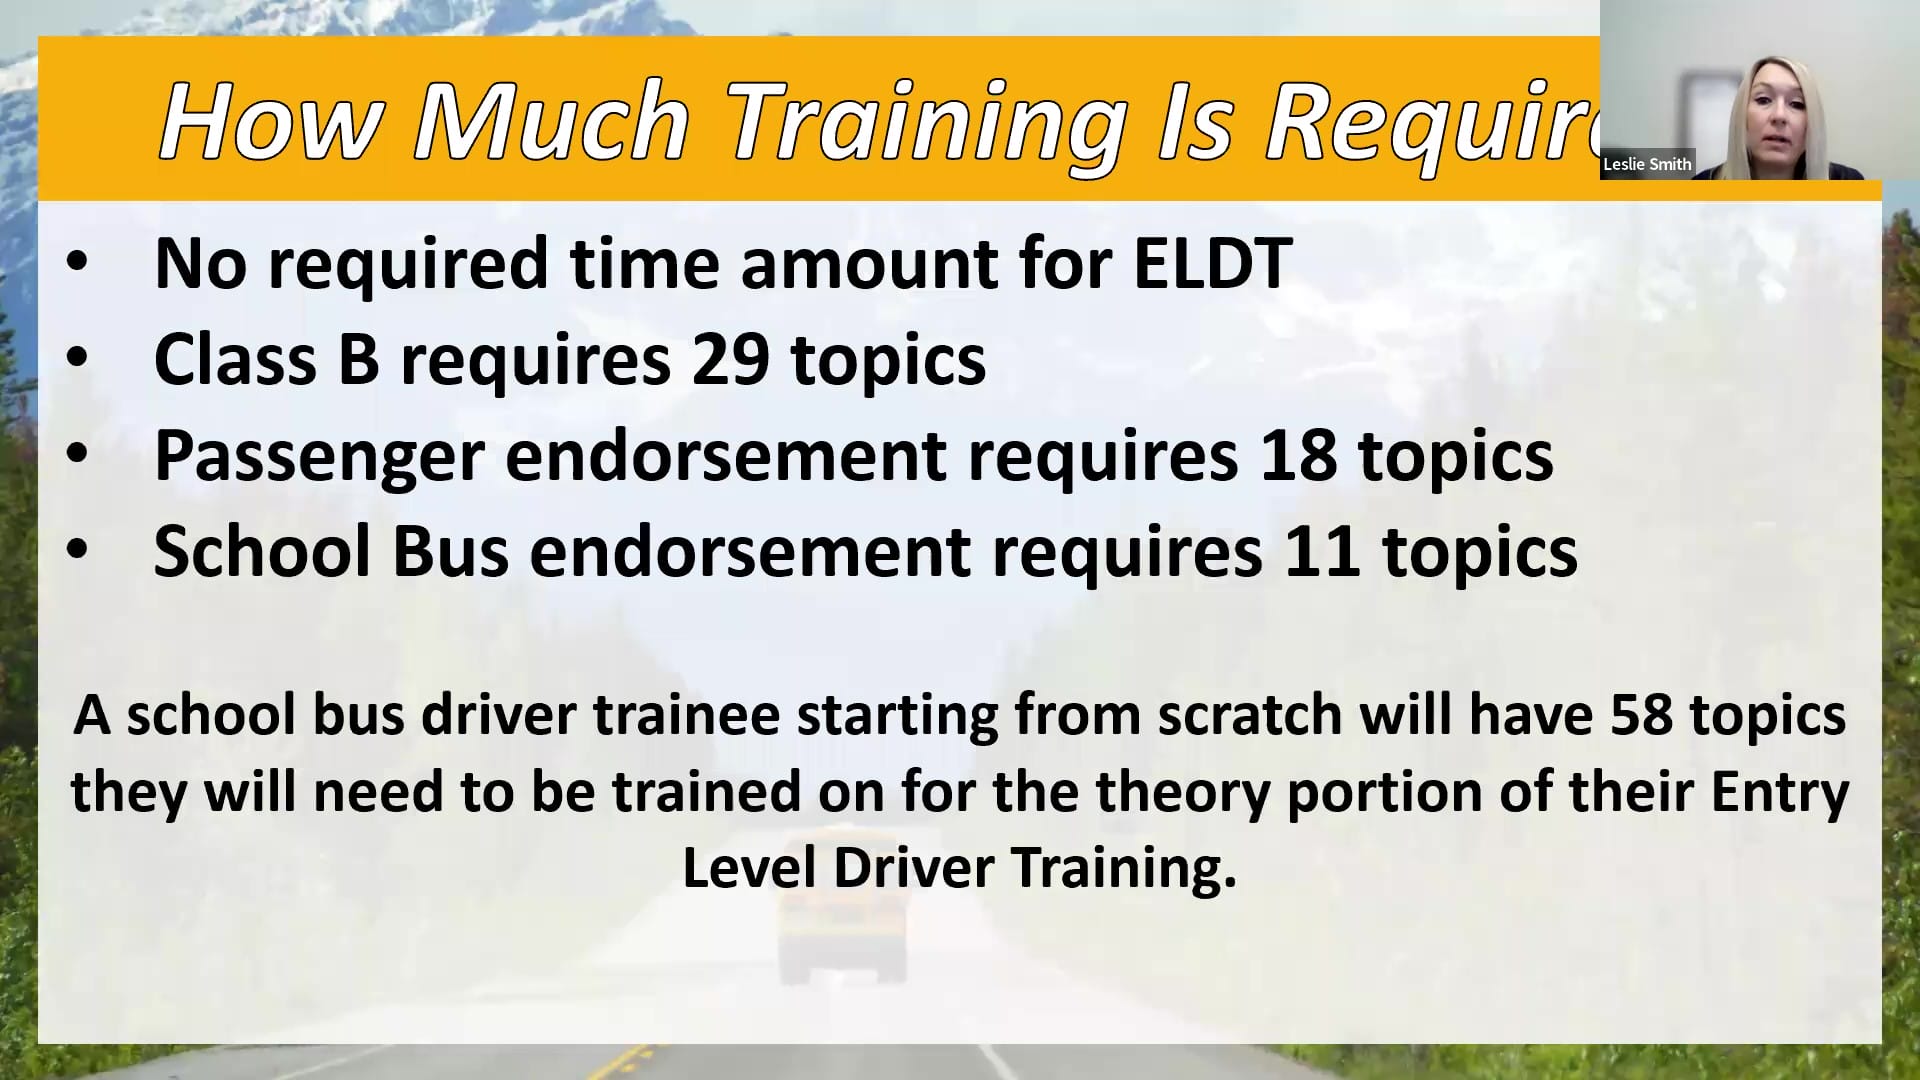 How Much ELDT Training is Required